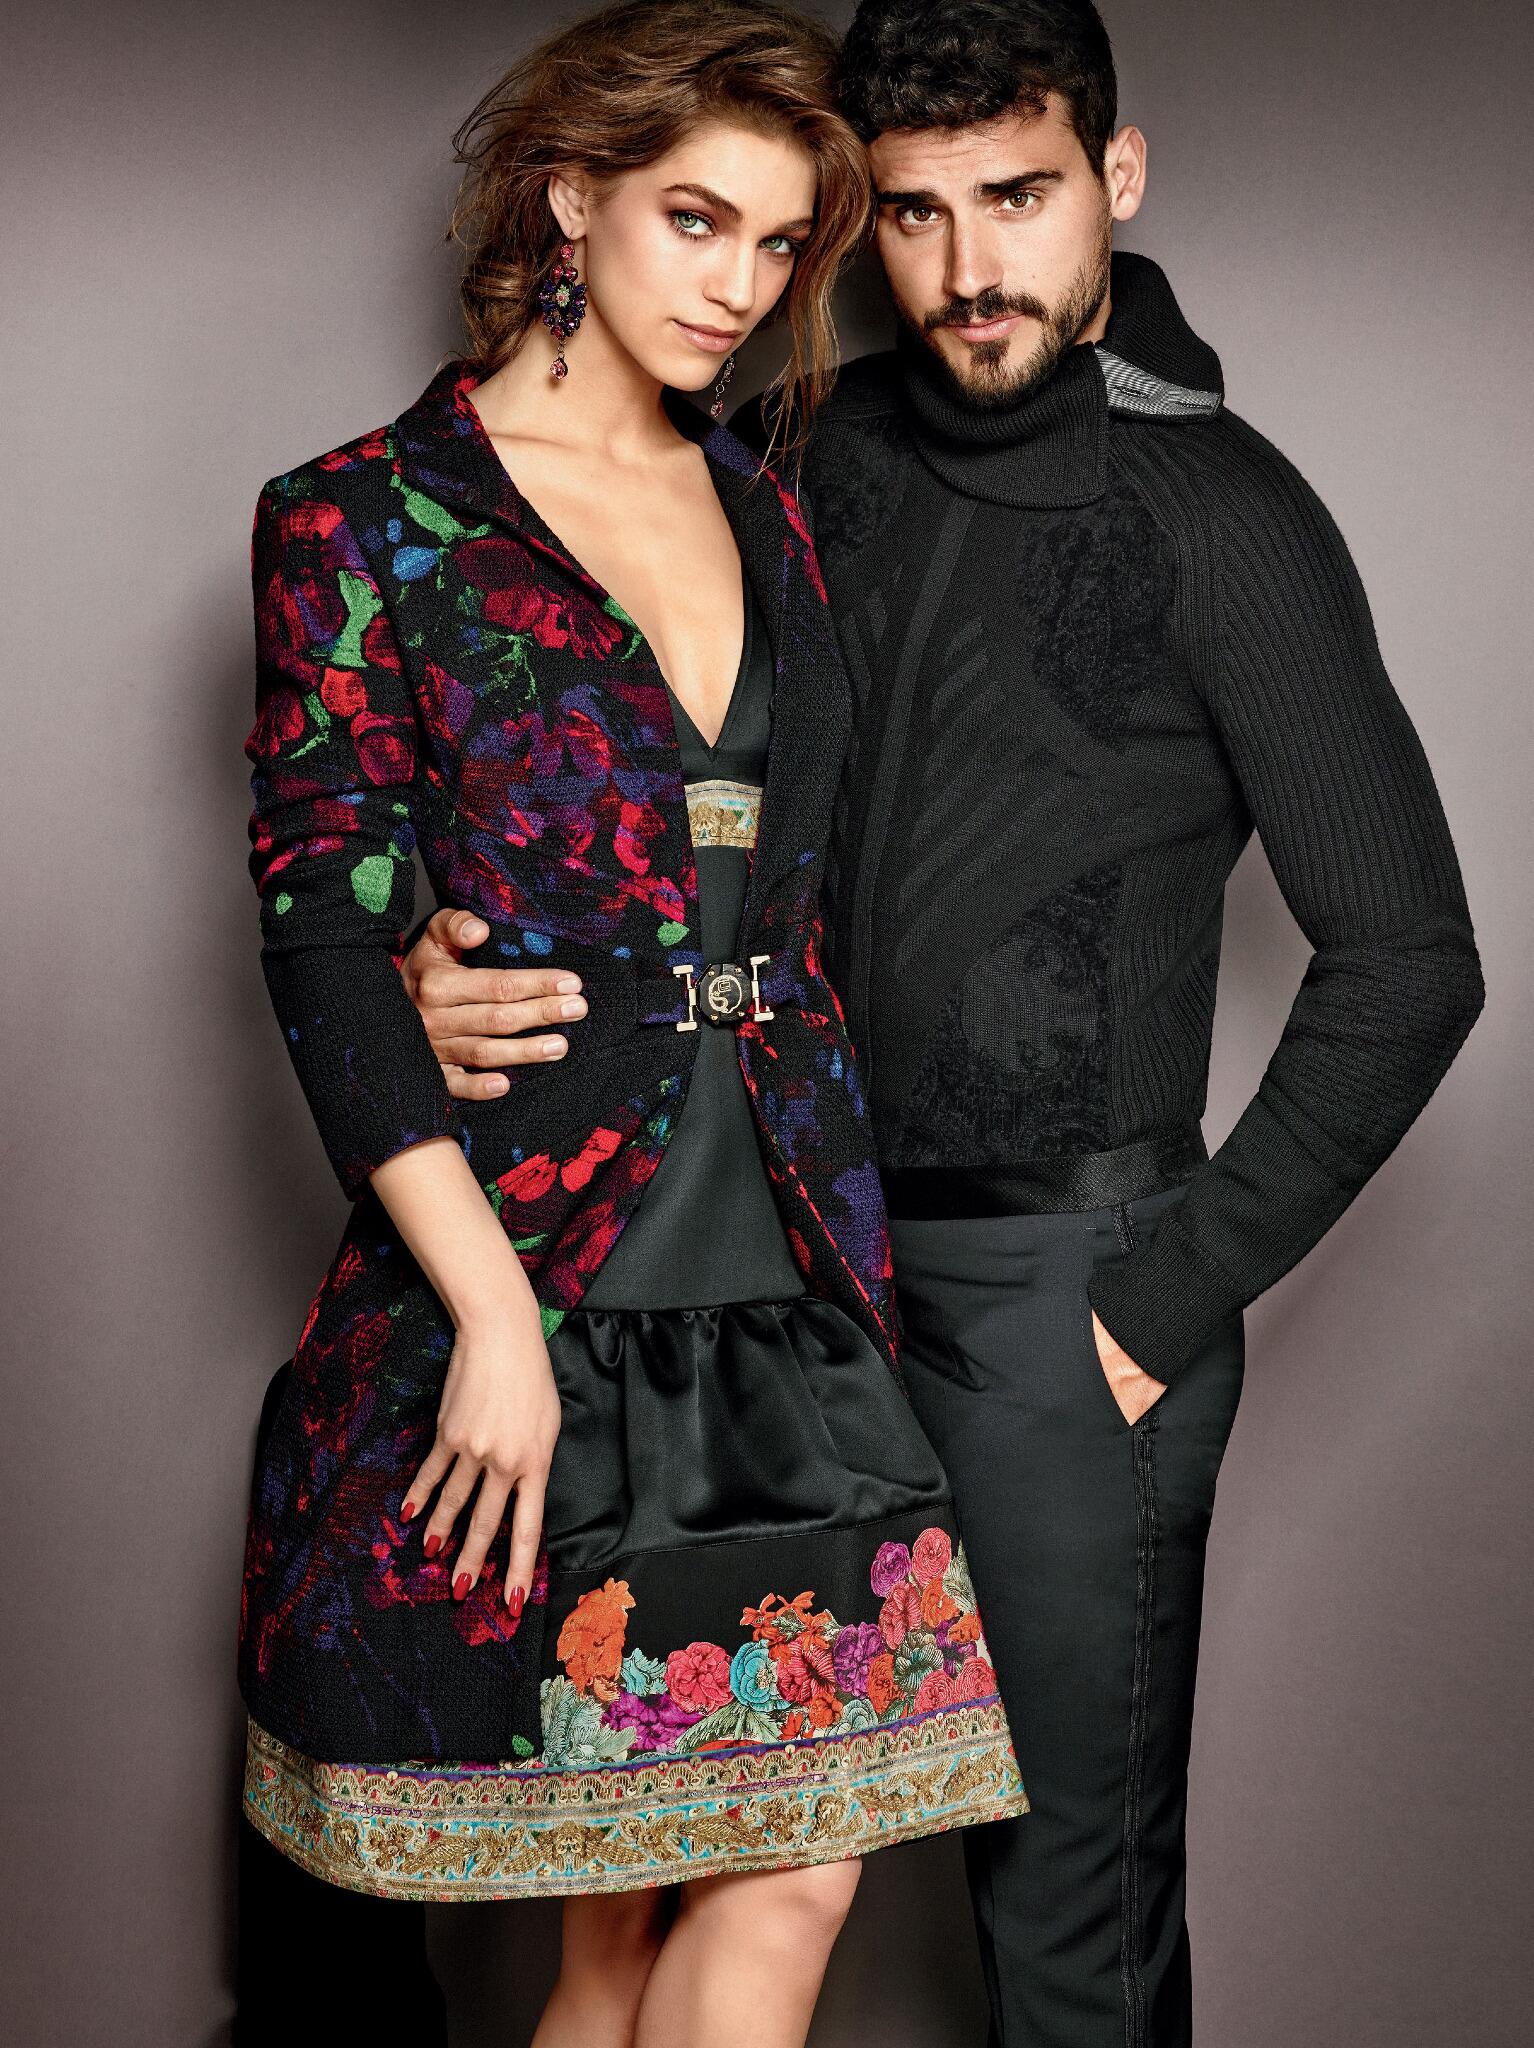 Skinnende erotisk Isaac Roberto Cavalli on Twitter: "Cavalli CLASS FW 2013: colorful floral  embroideries for her, a total black look for him. http://t.co/VYag8p4Kef  http://t.co/gxXPIIfVzT" / Twitter